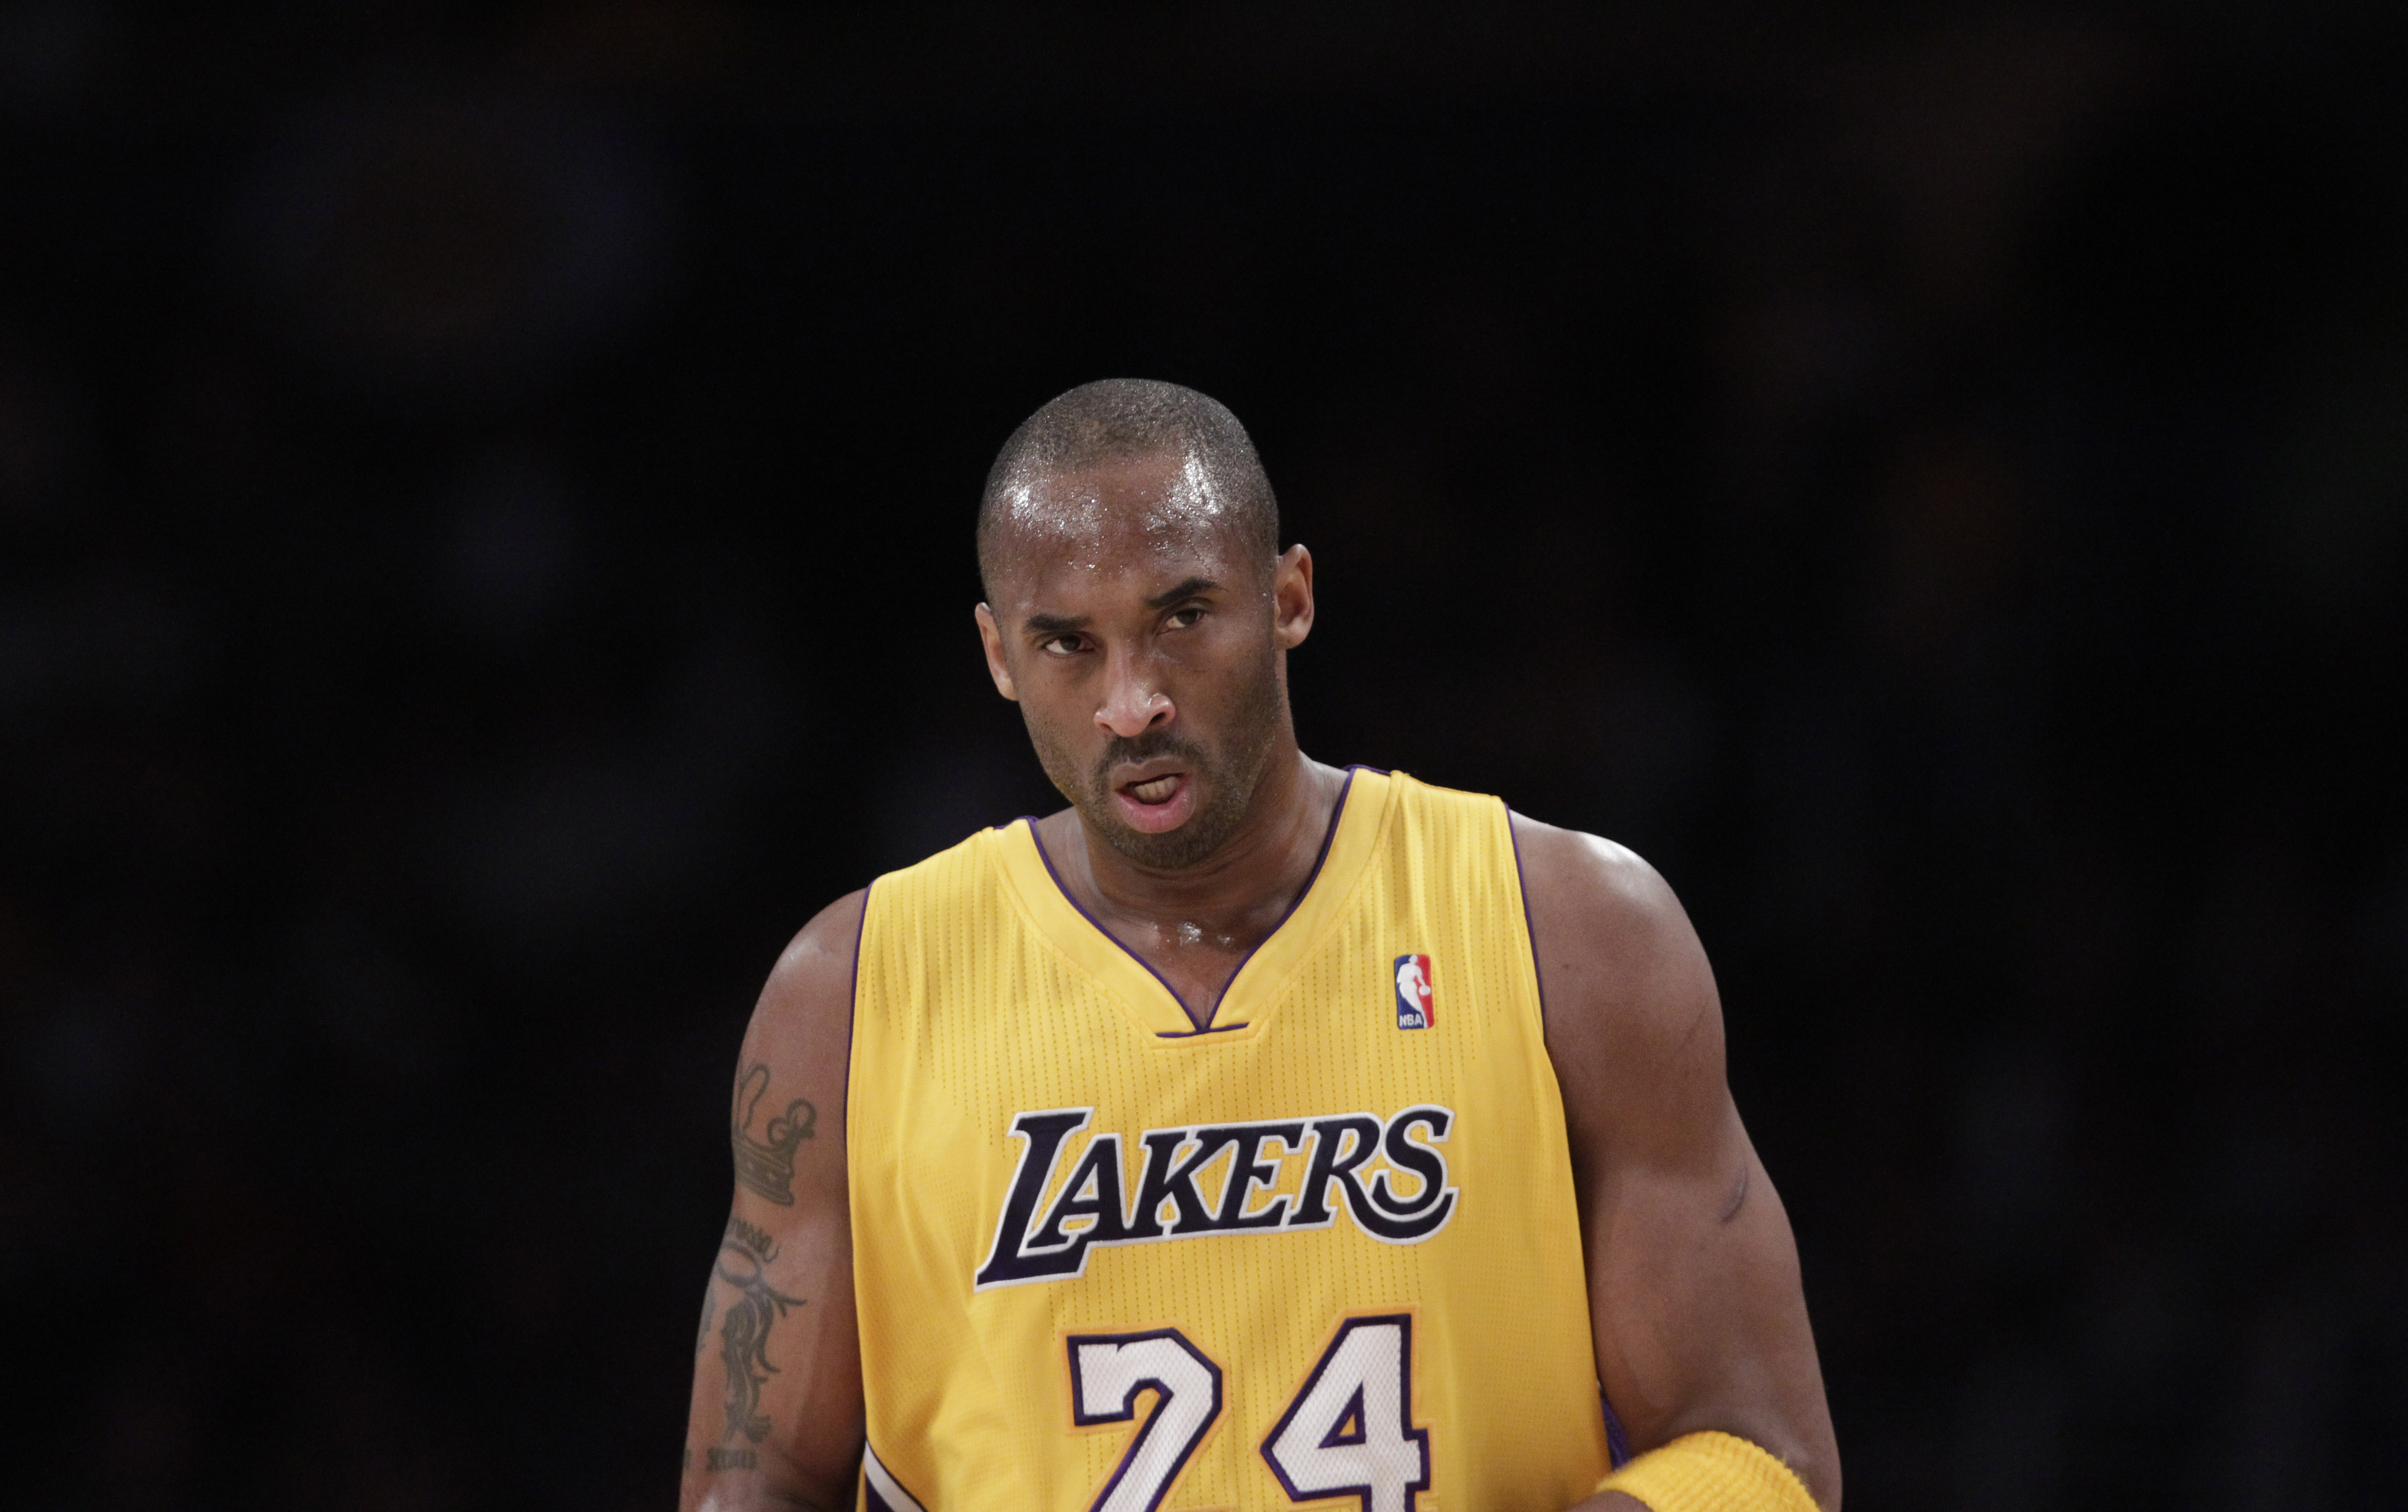 Why did Kobe Bryant wear two jersey numbers?